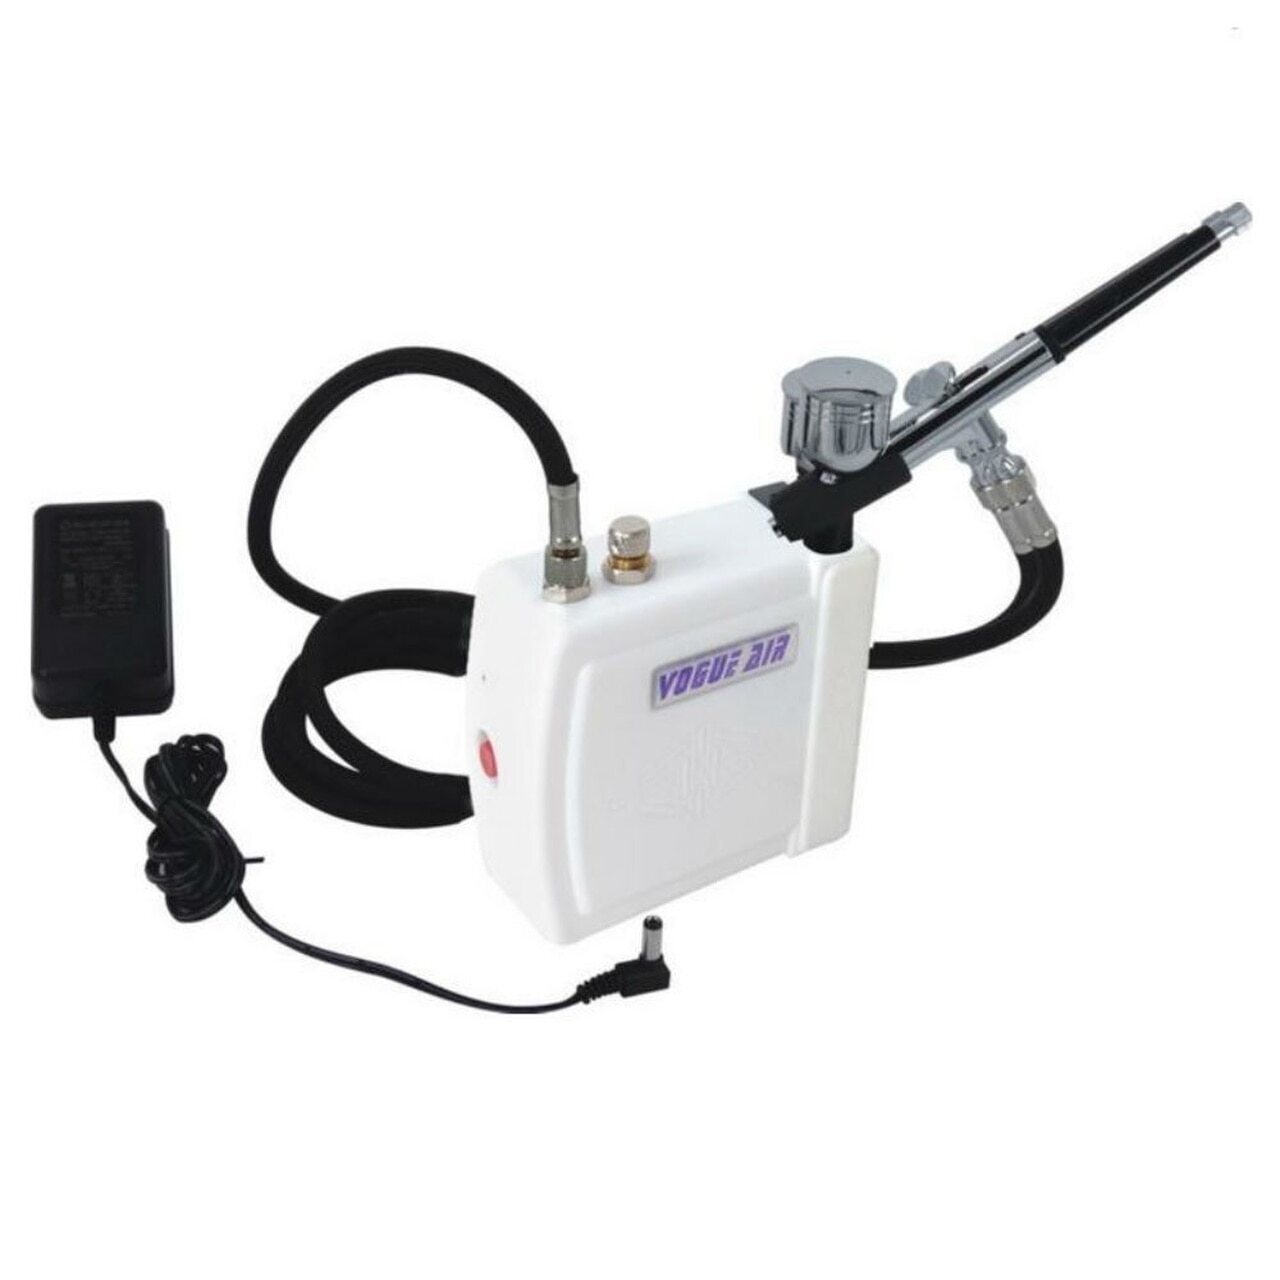 Hseng Mini Air Compressor Kit (Includes Hose and HS-30 Airbrush